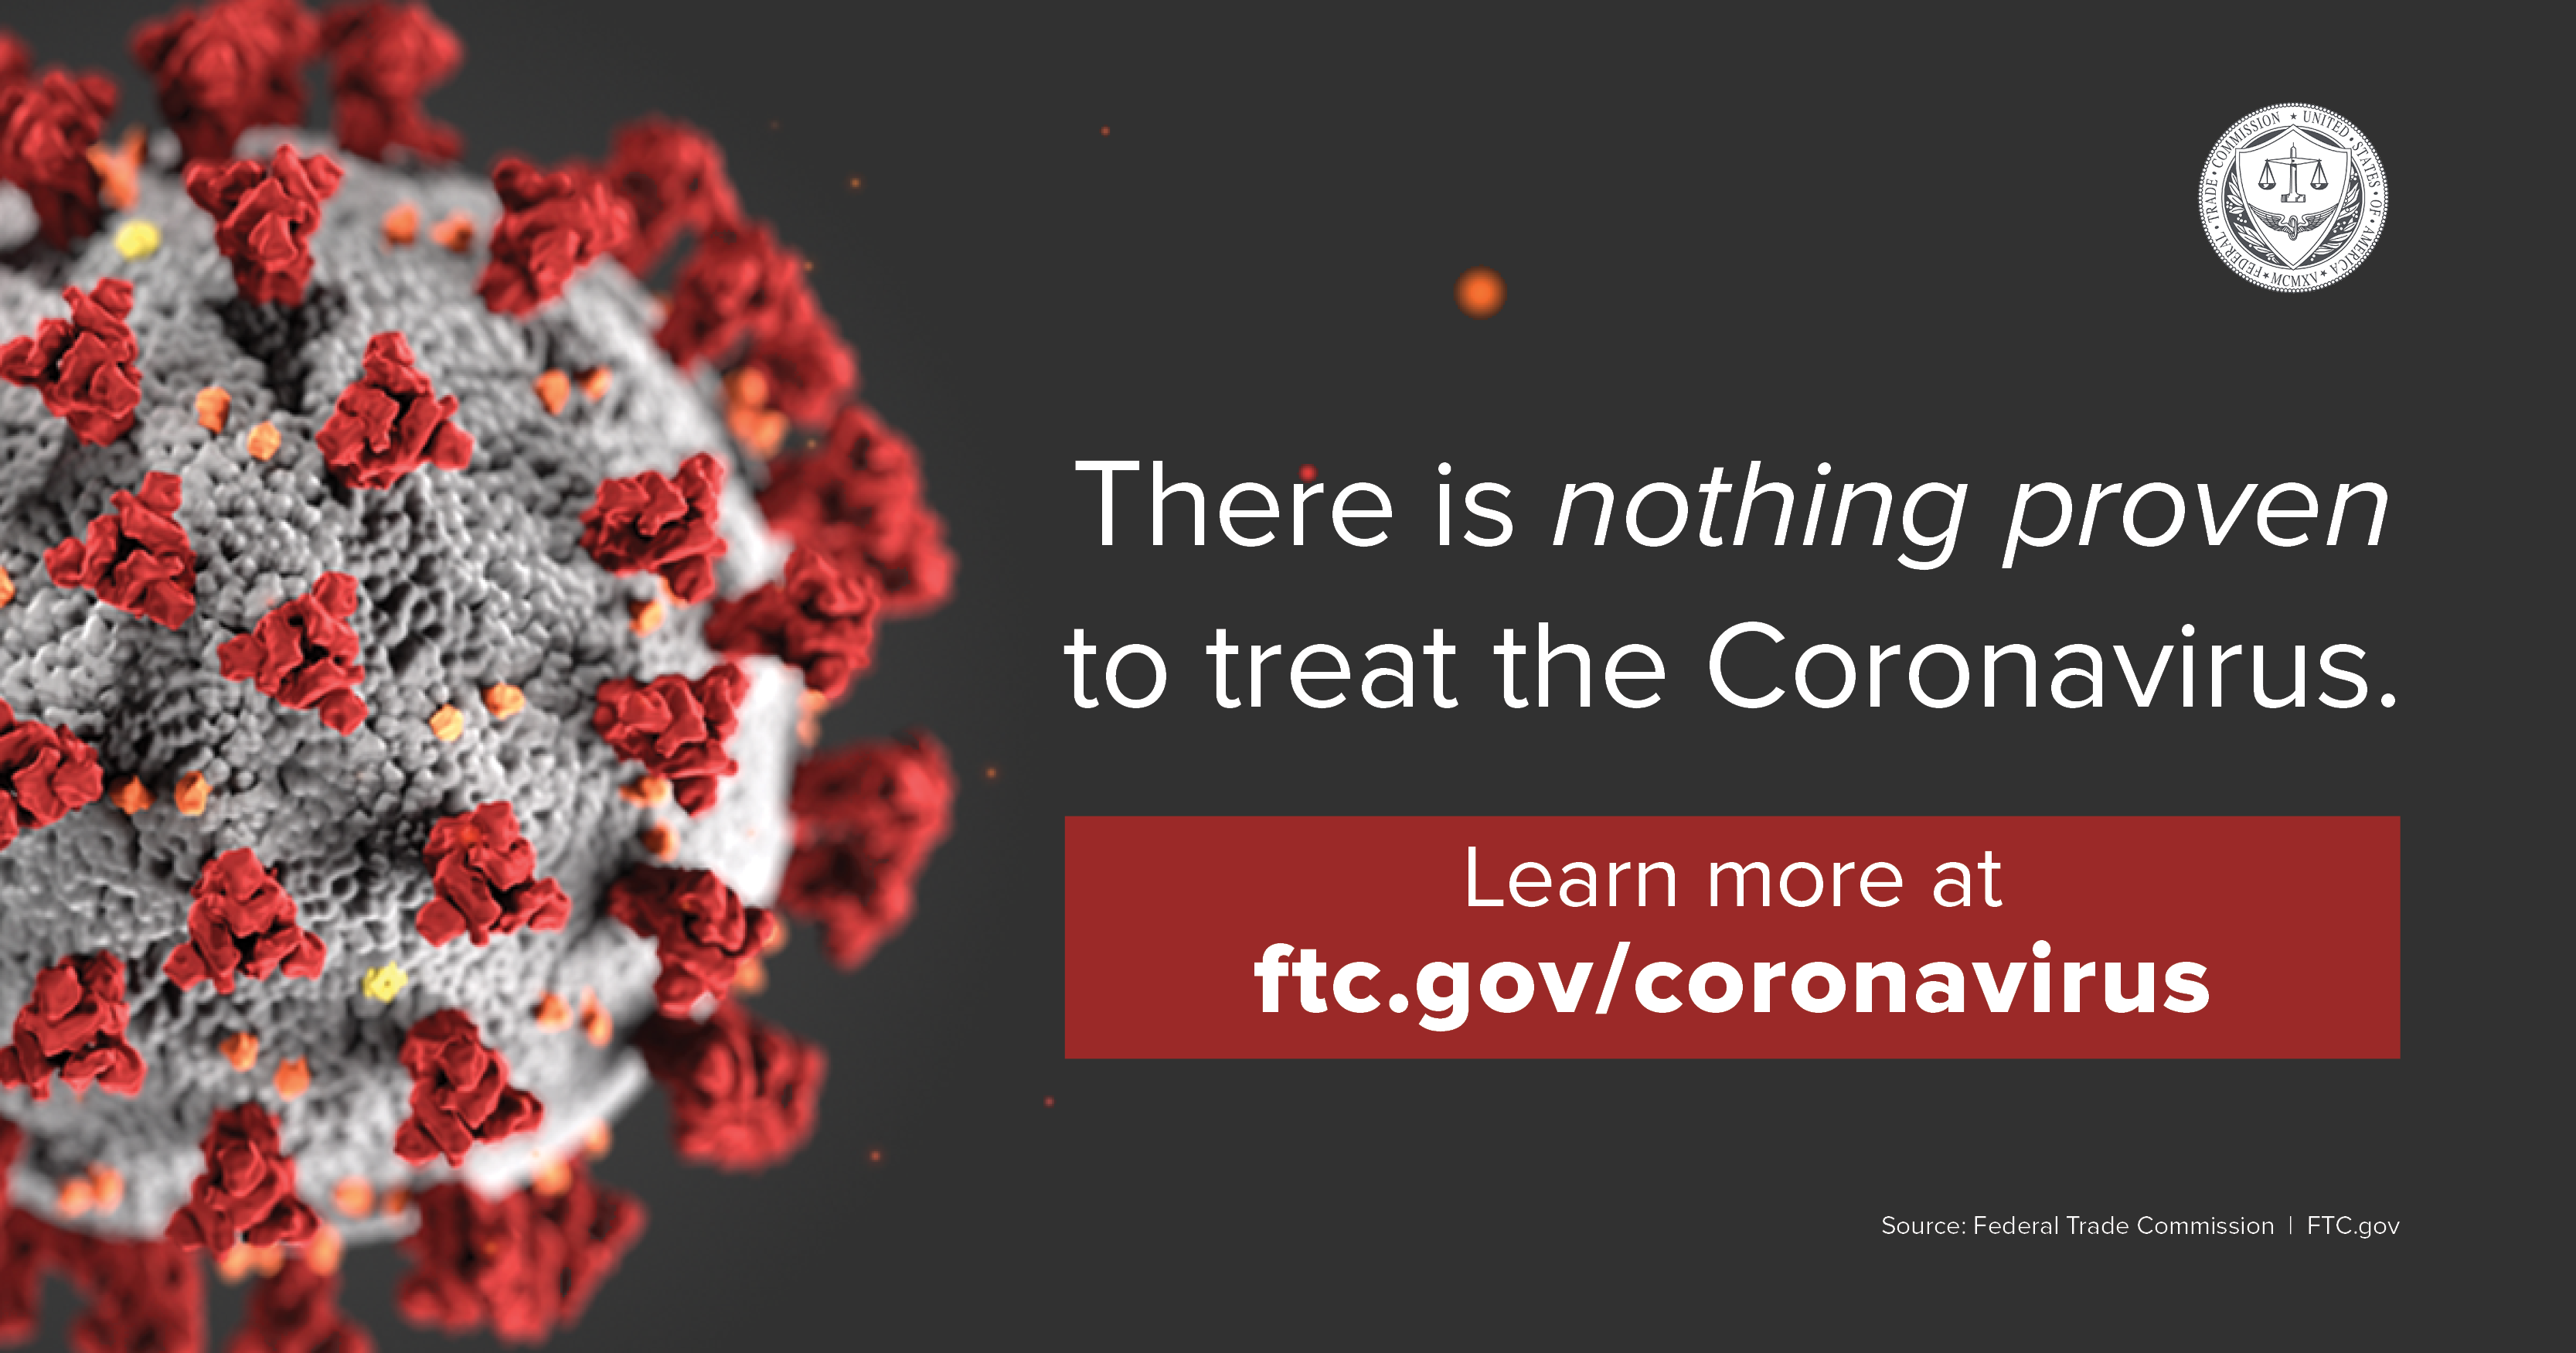 There is nothing proven to treat the Coronavirus